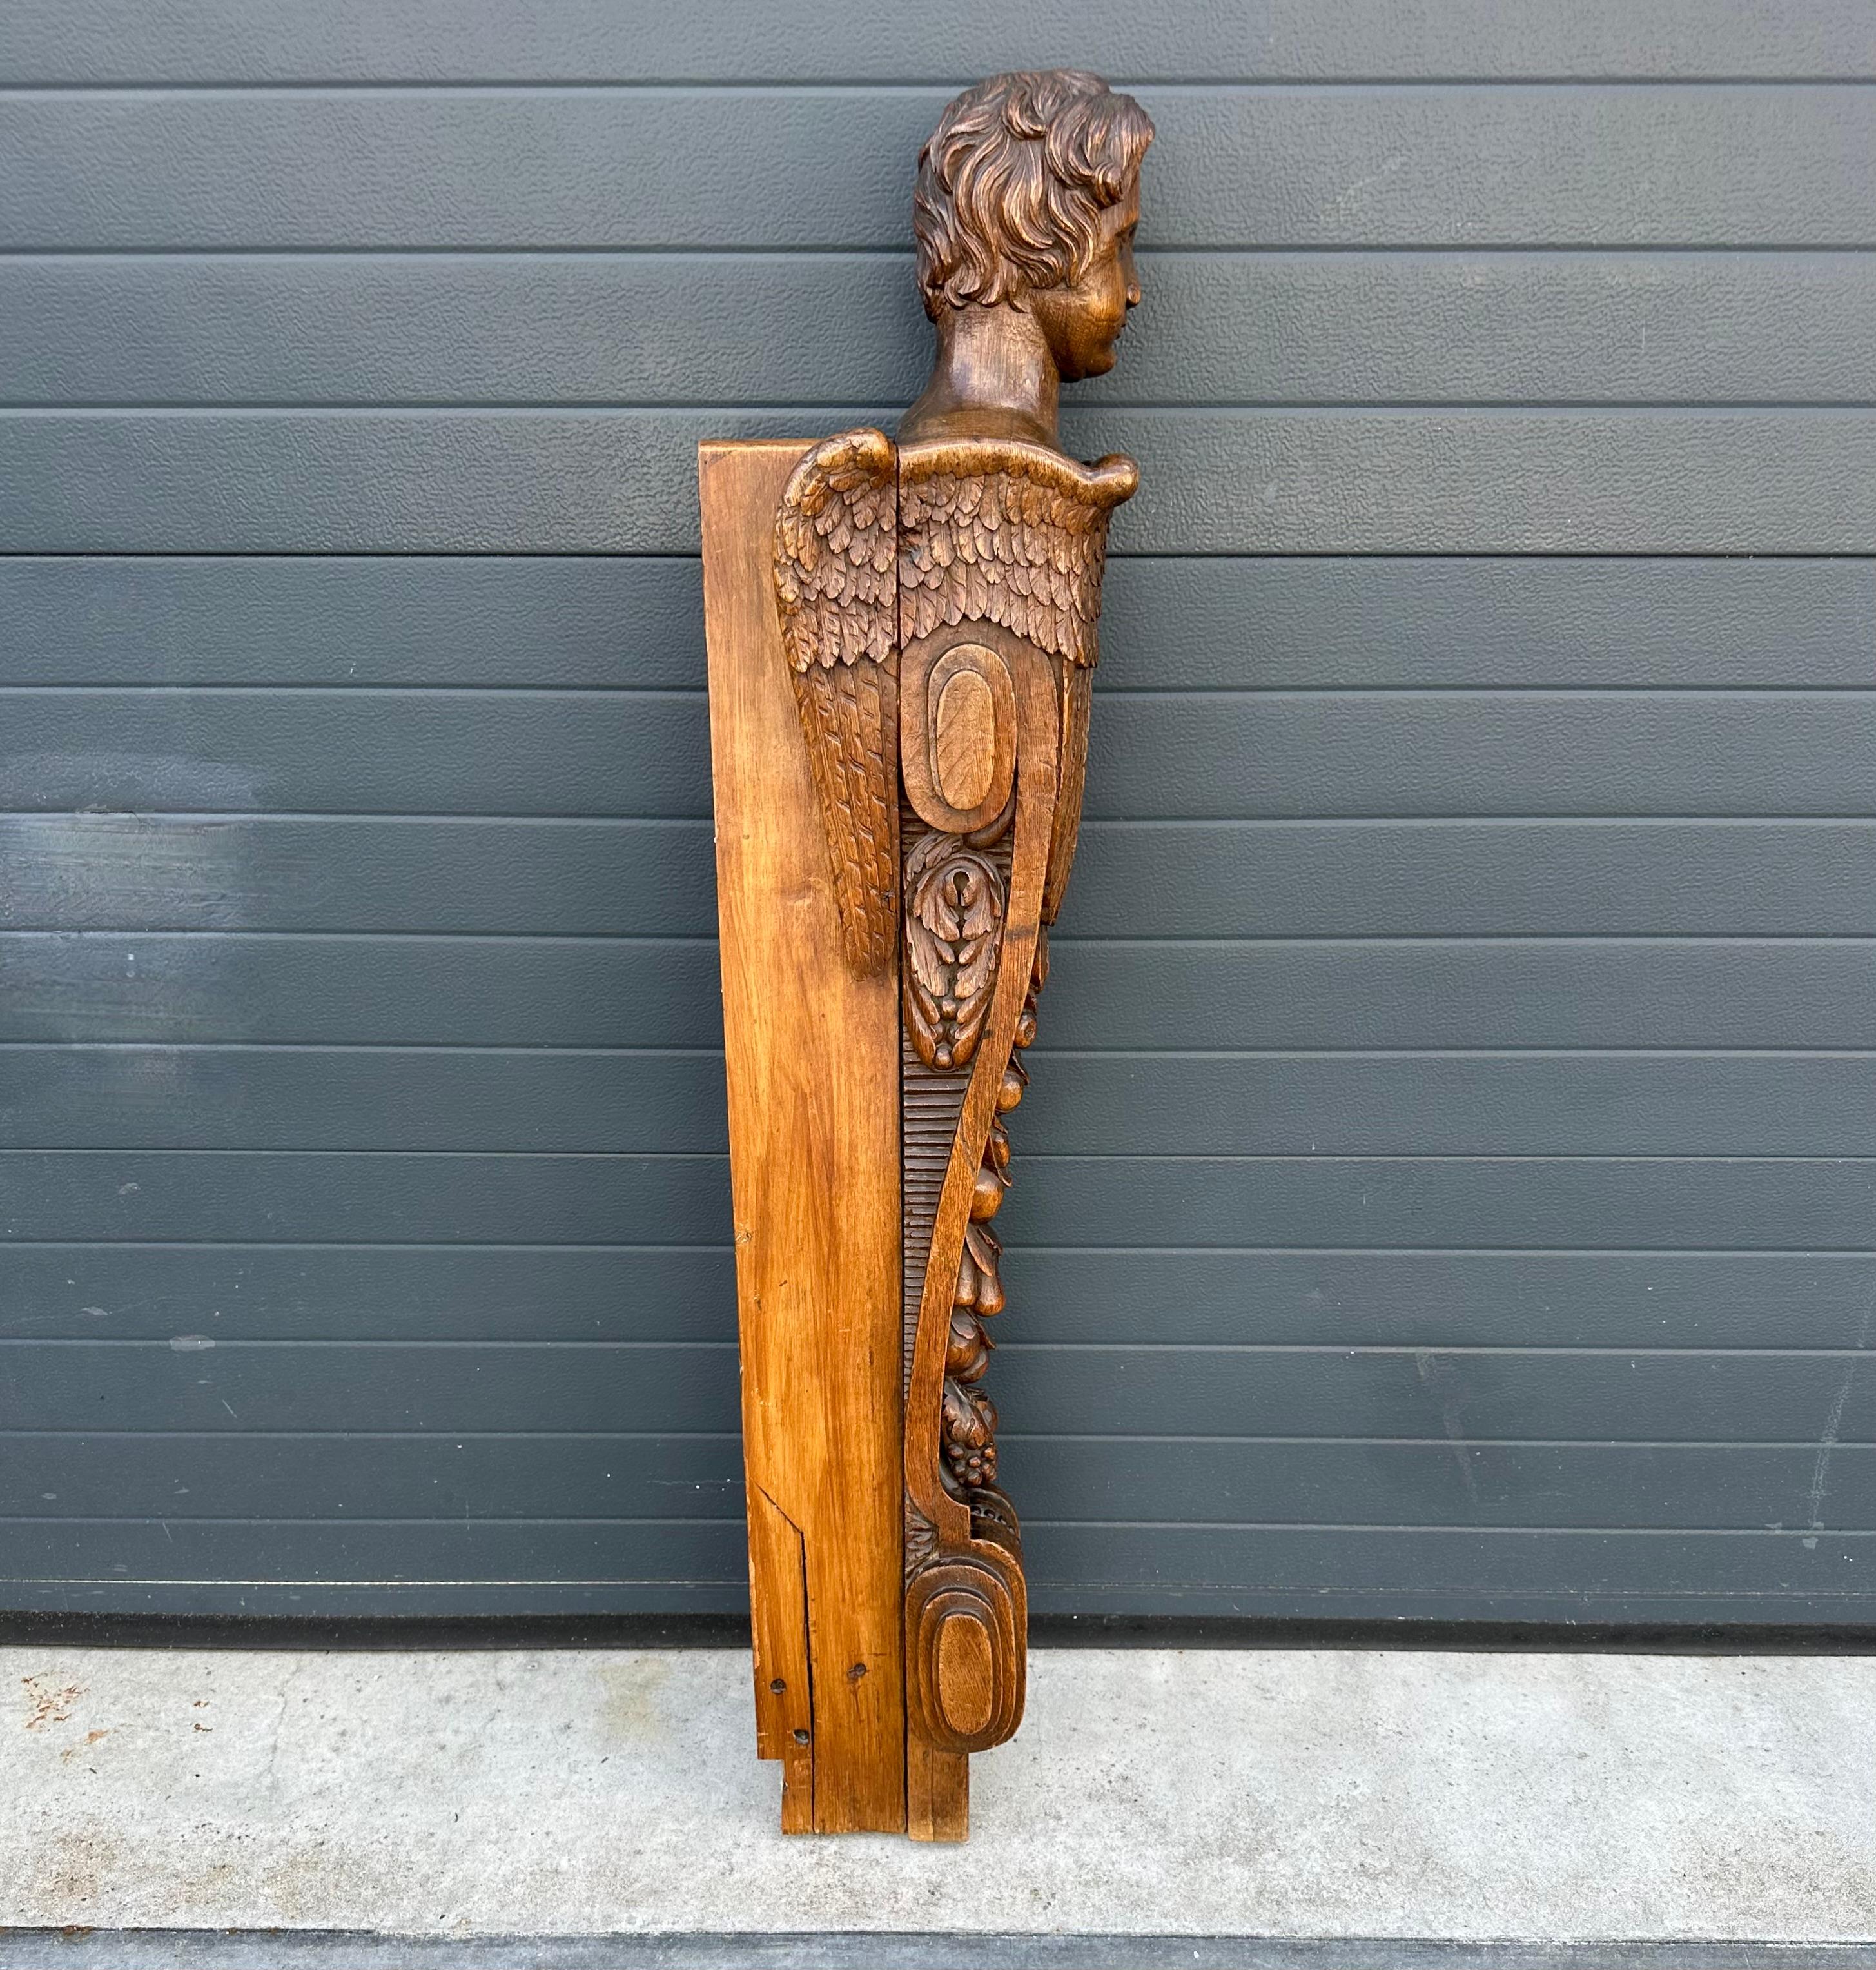 Antique Gothic Revival Carved Oak Stair Rail Newel Post w Angel Sculpture 19thC. For Sale 2